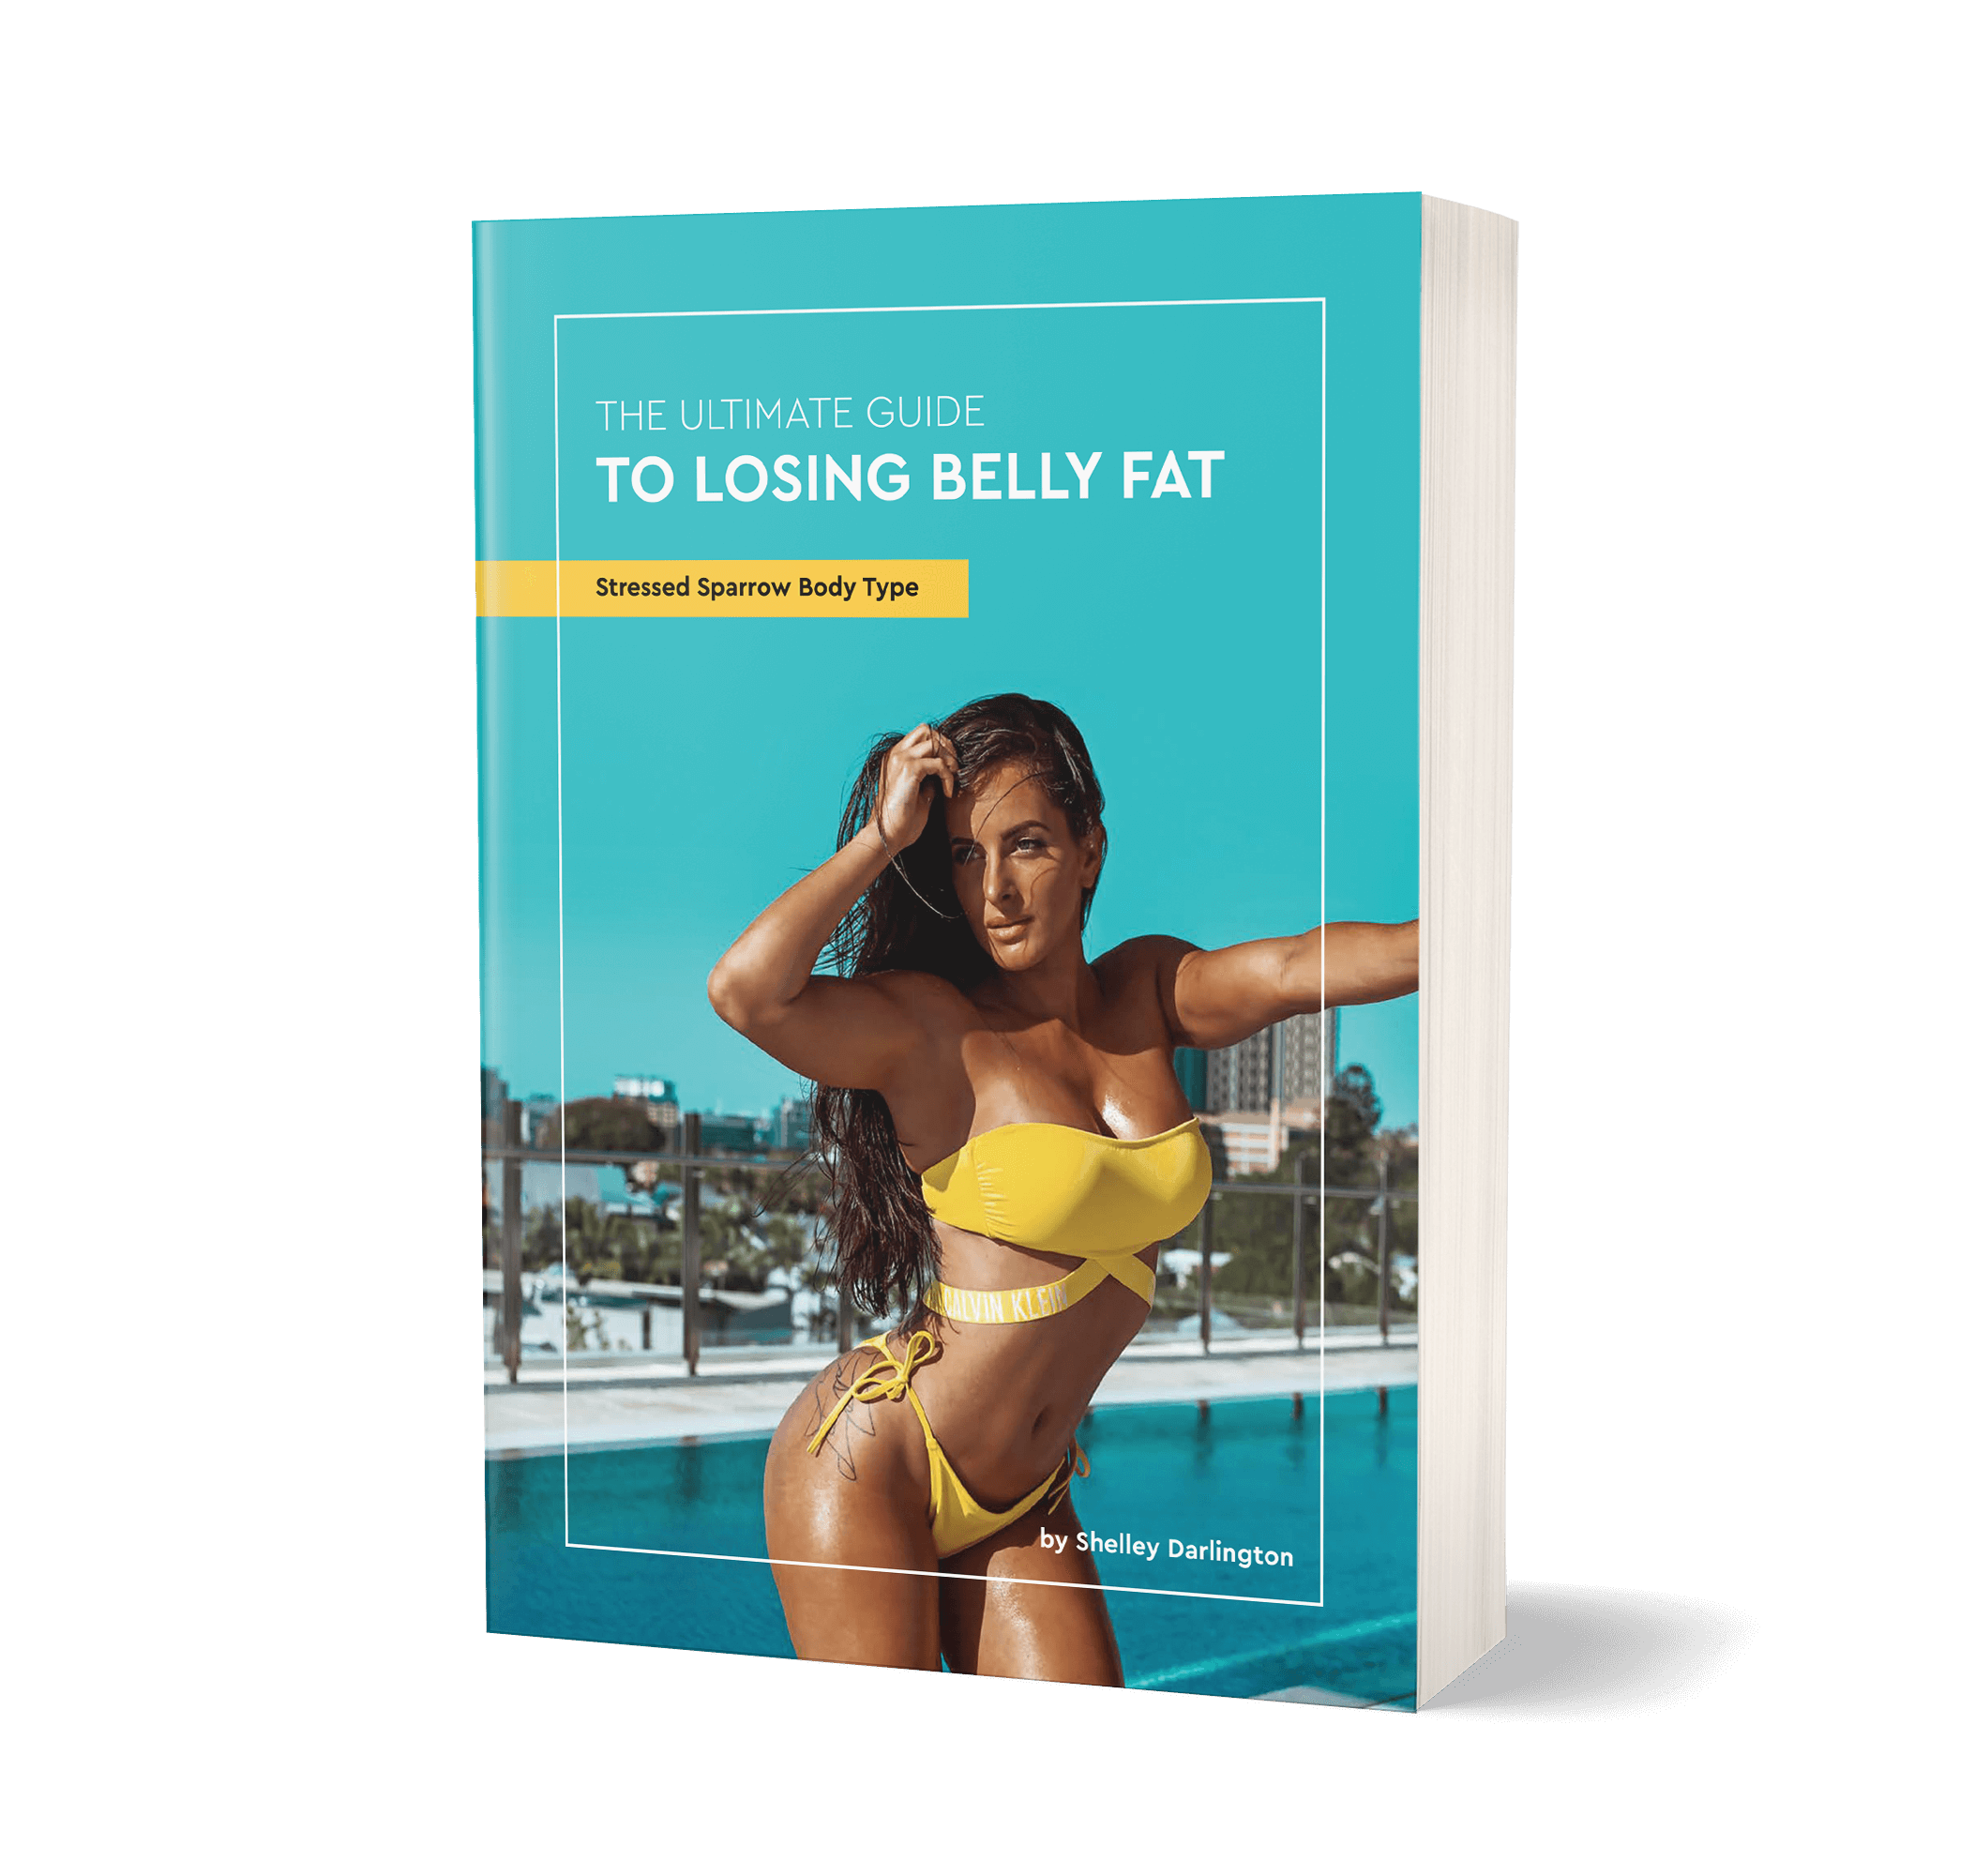 The Ultimate Guide to Losing Belly Fat (stressed sparrow)